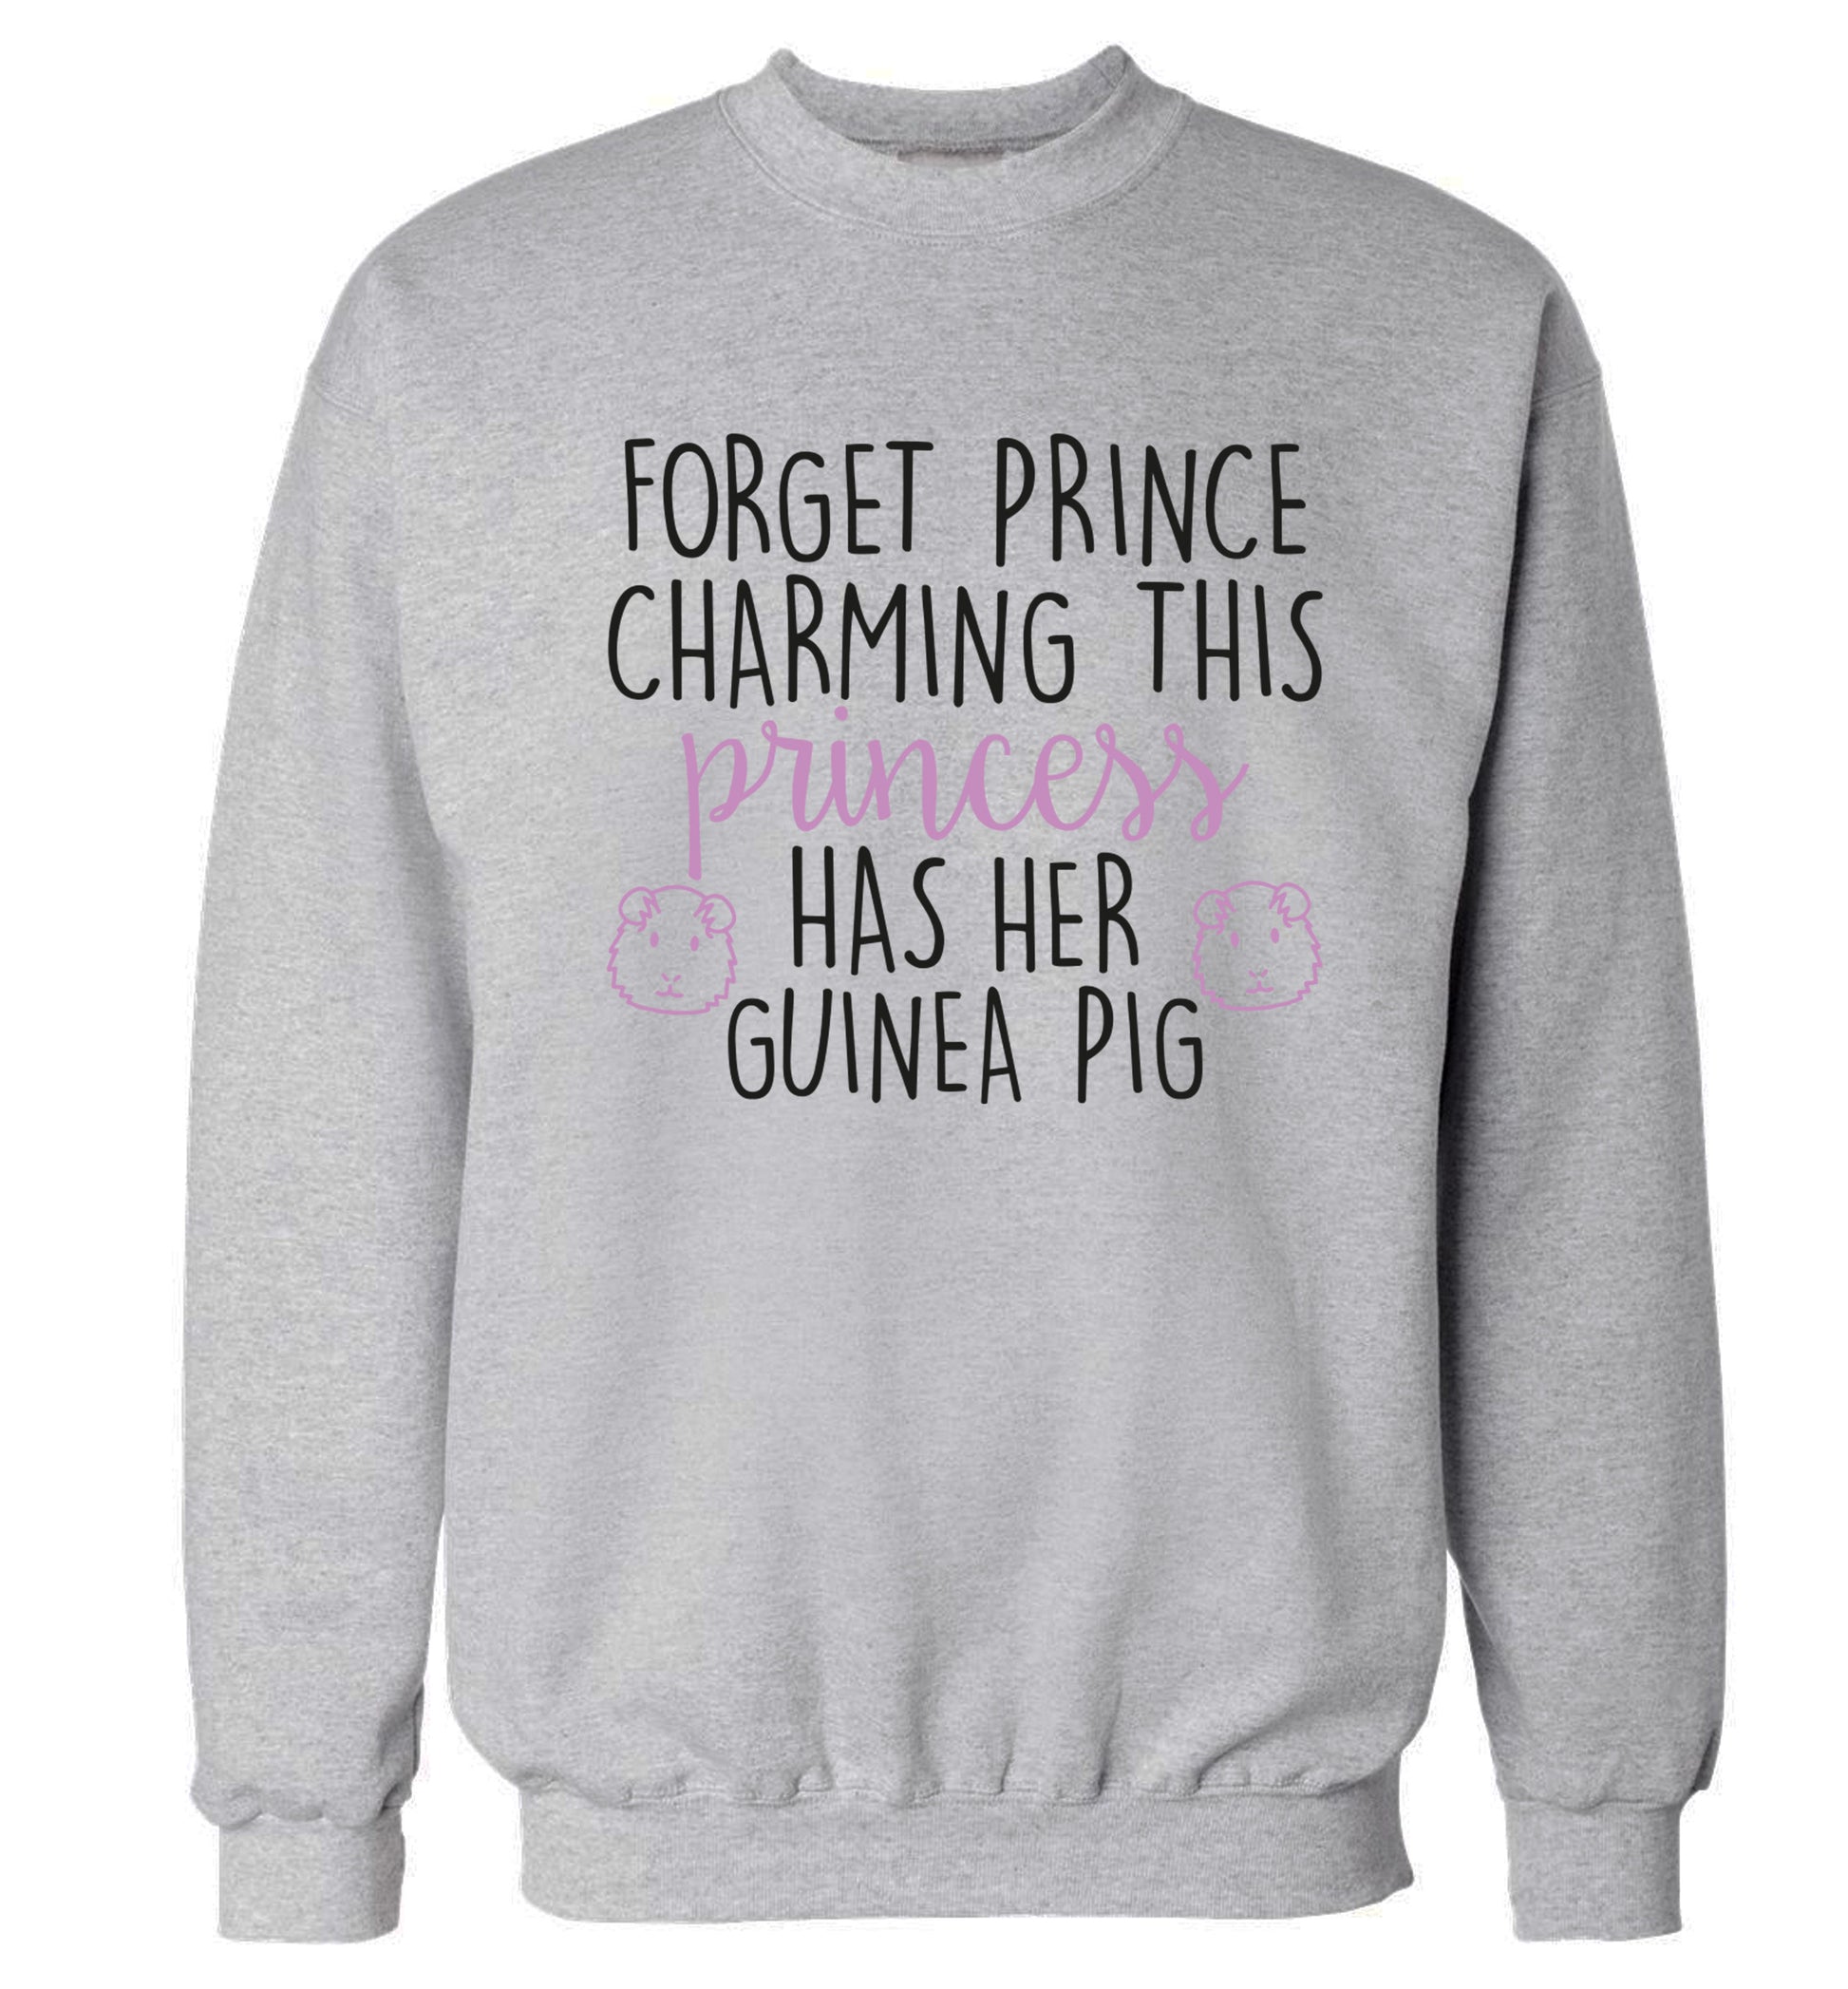 Forget prince charming, I have my guinea pig Adult's unisex grey  sweater 2XL